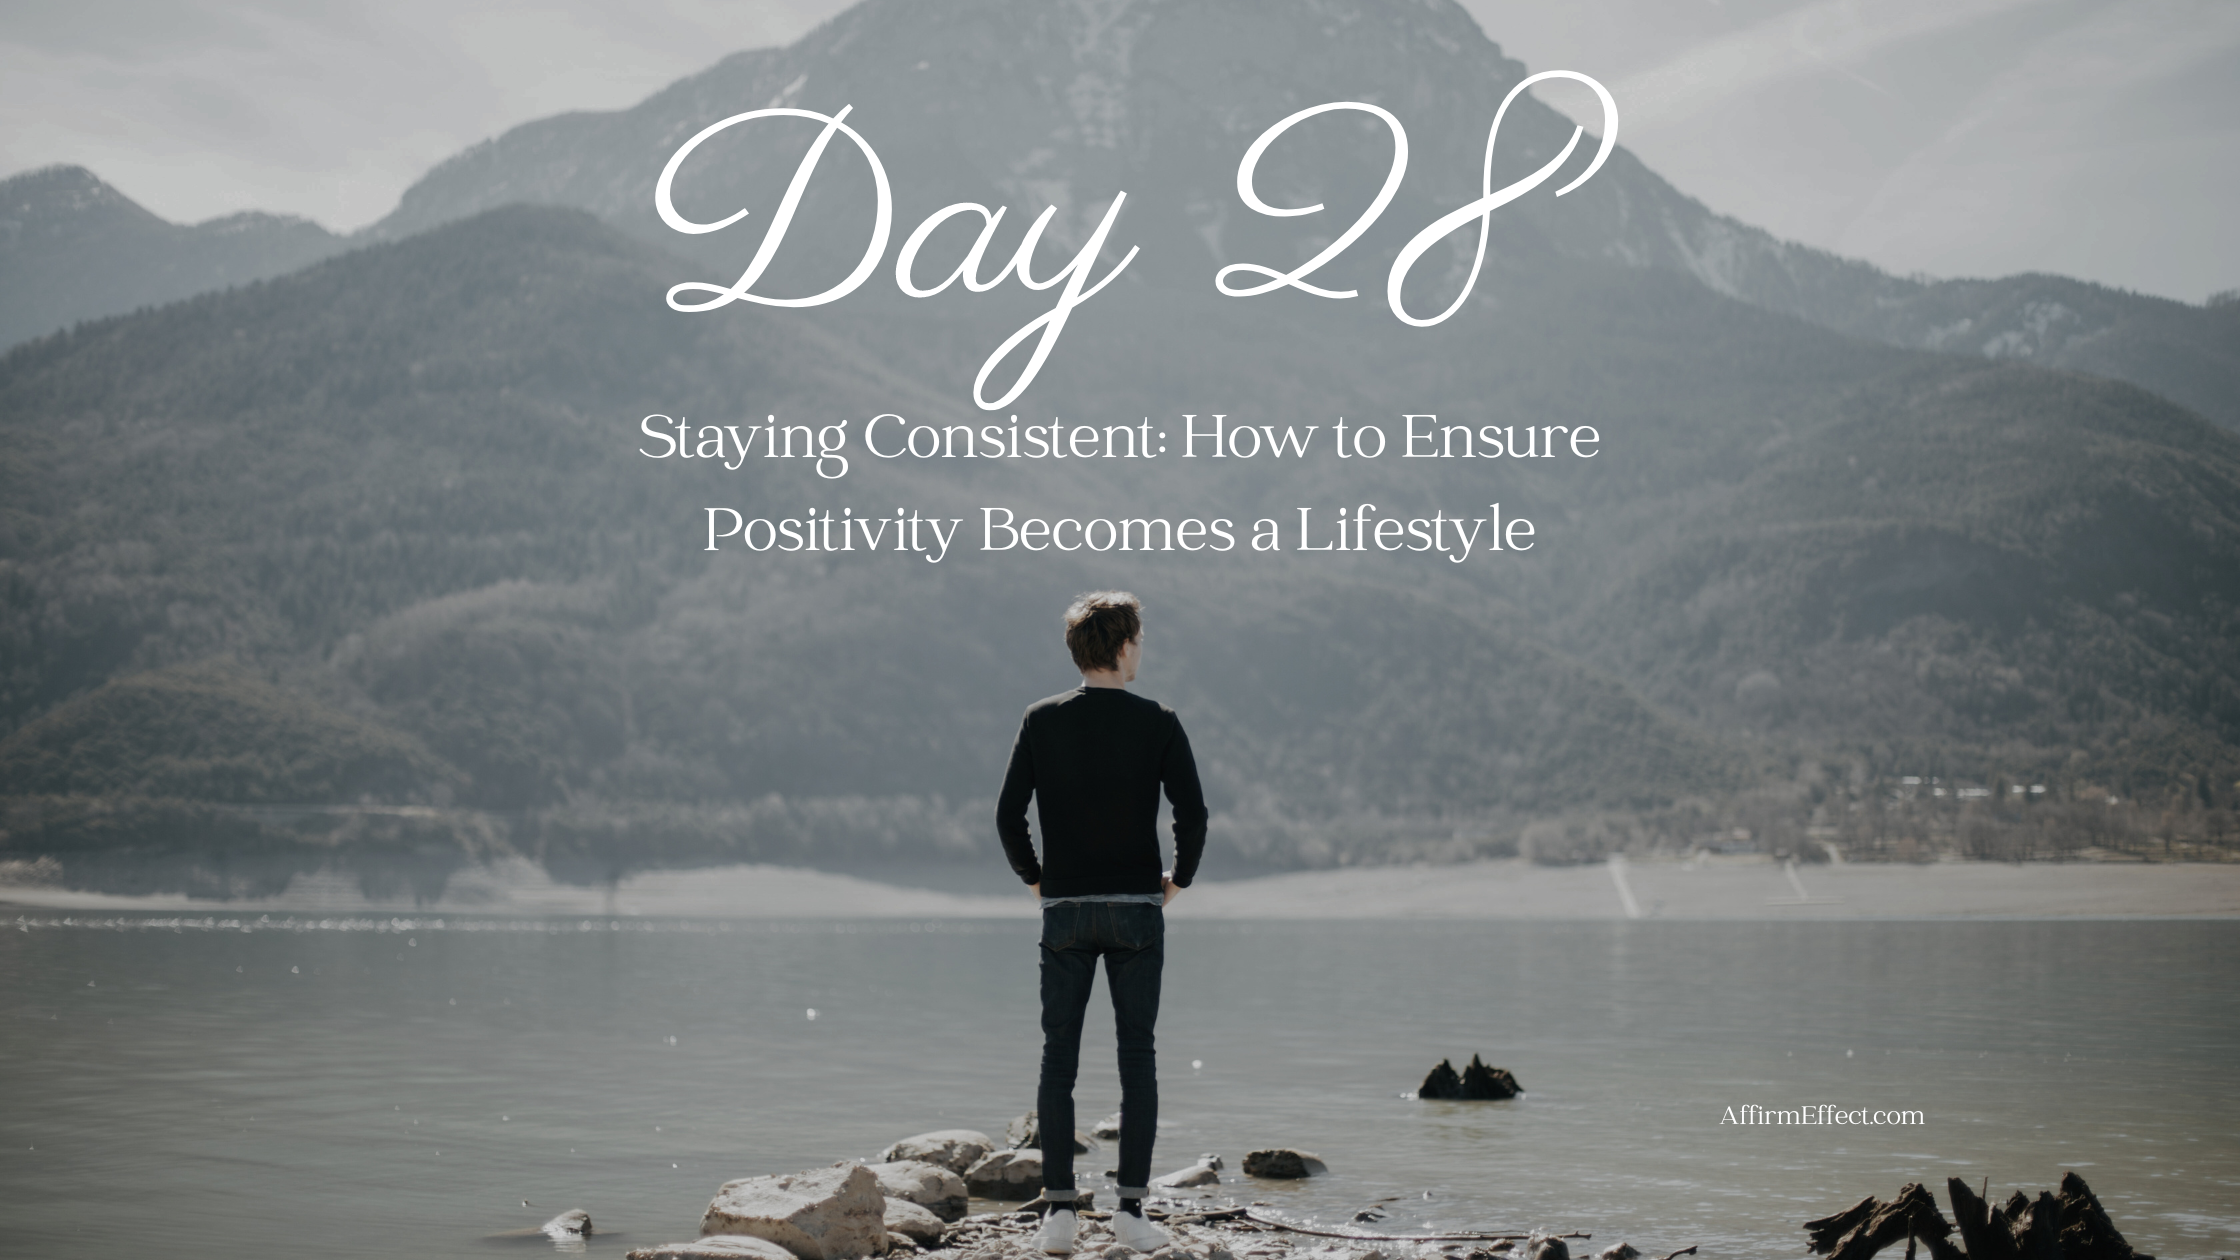 Day 28: Staying Consistent: How to Ensure Positivity Becomes a Lifestyle